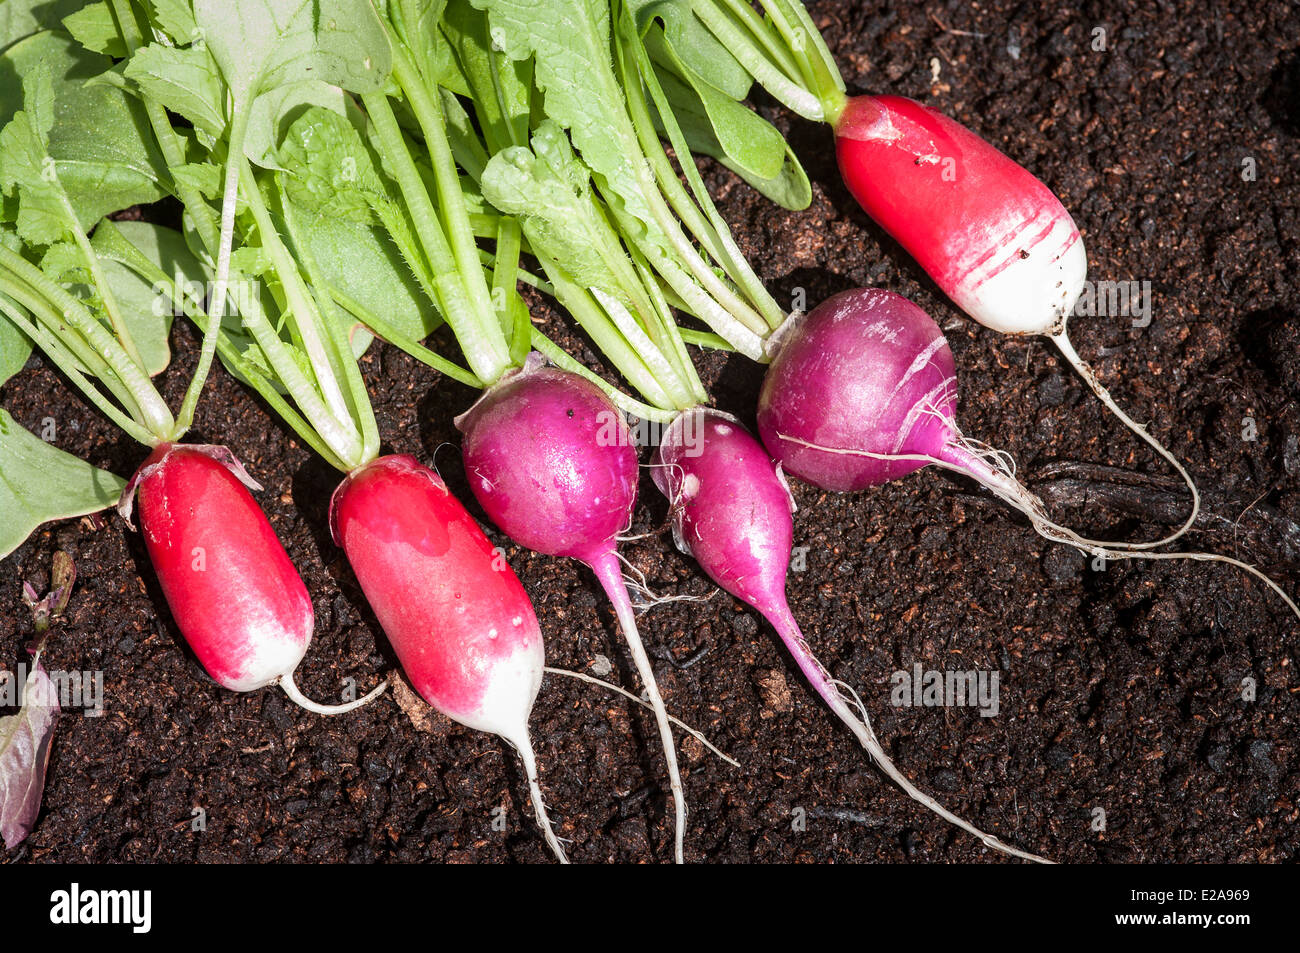 Freshly picked radishes ready for the table Stock Photo